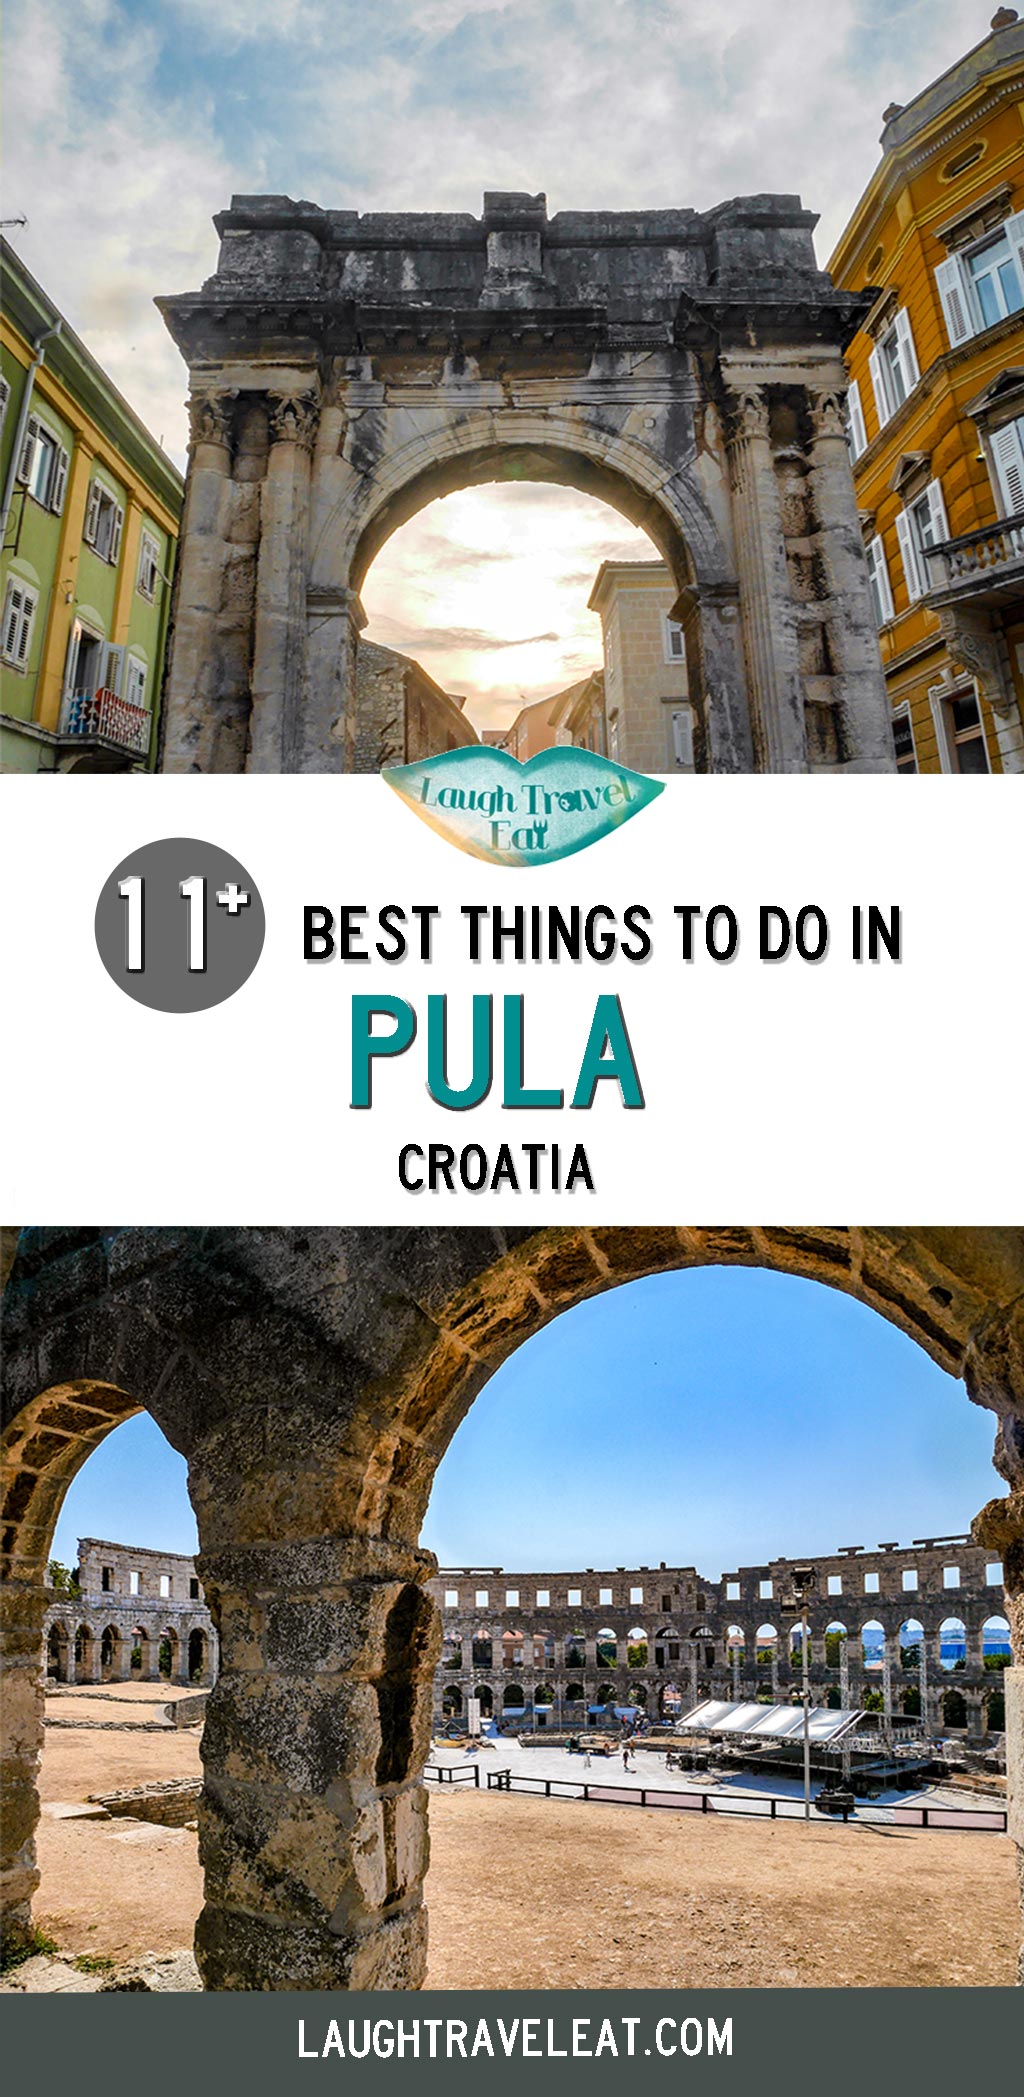 Pula, Croatia not only has one of the best preserved amphitheater in the world, but also amazing cuisine and other stunning Roman ruins. Here are the best things to do there #Pula #Croatia